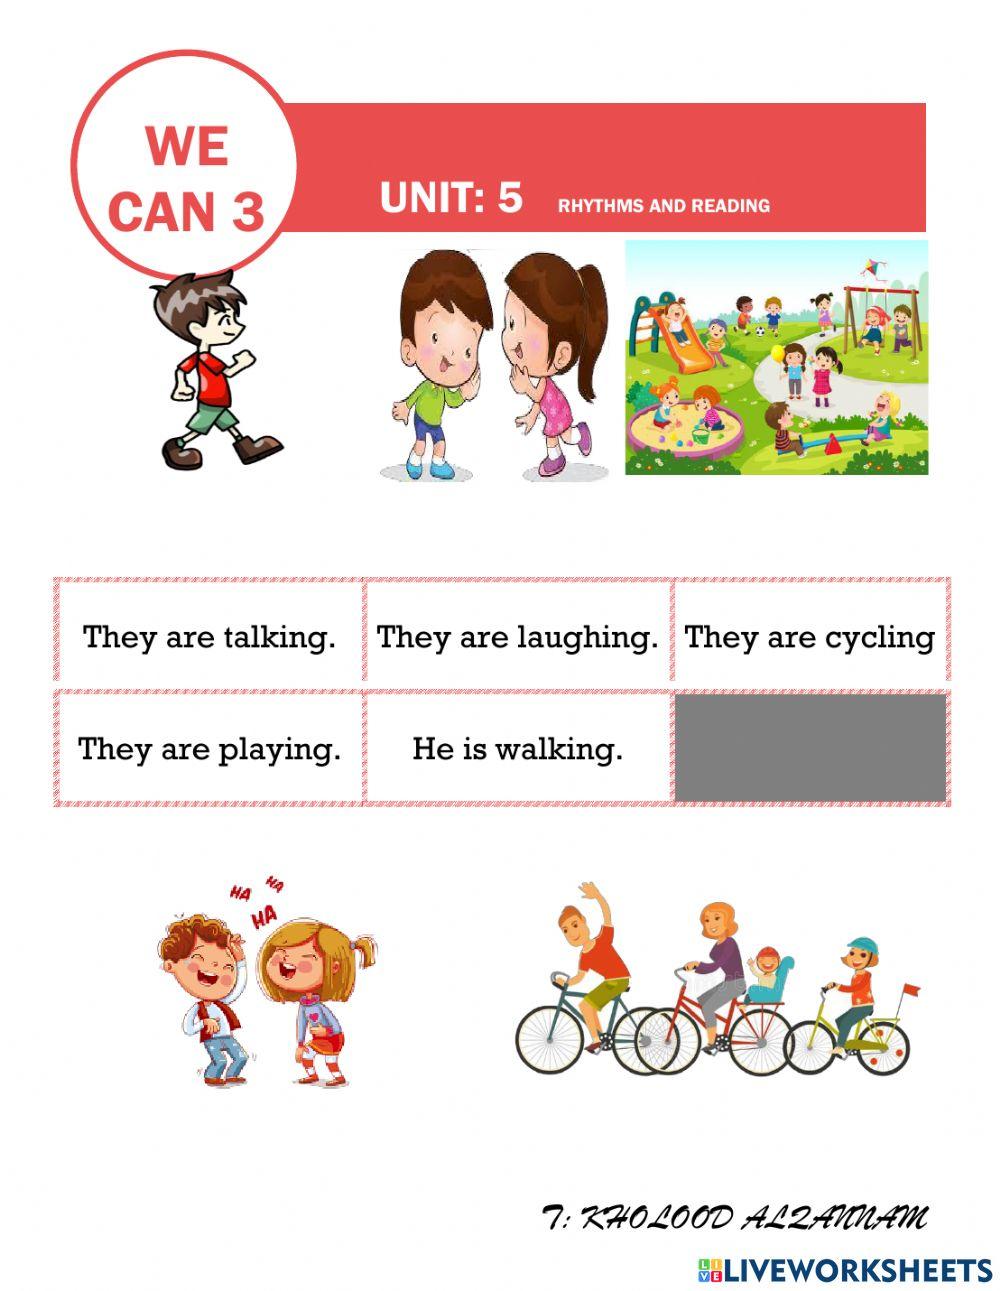 We can 3 Unit 5 Rhythms and reading